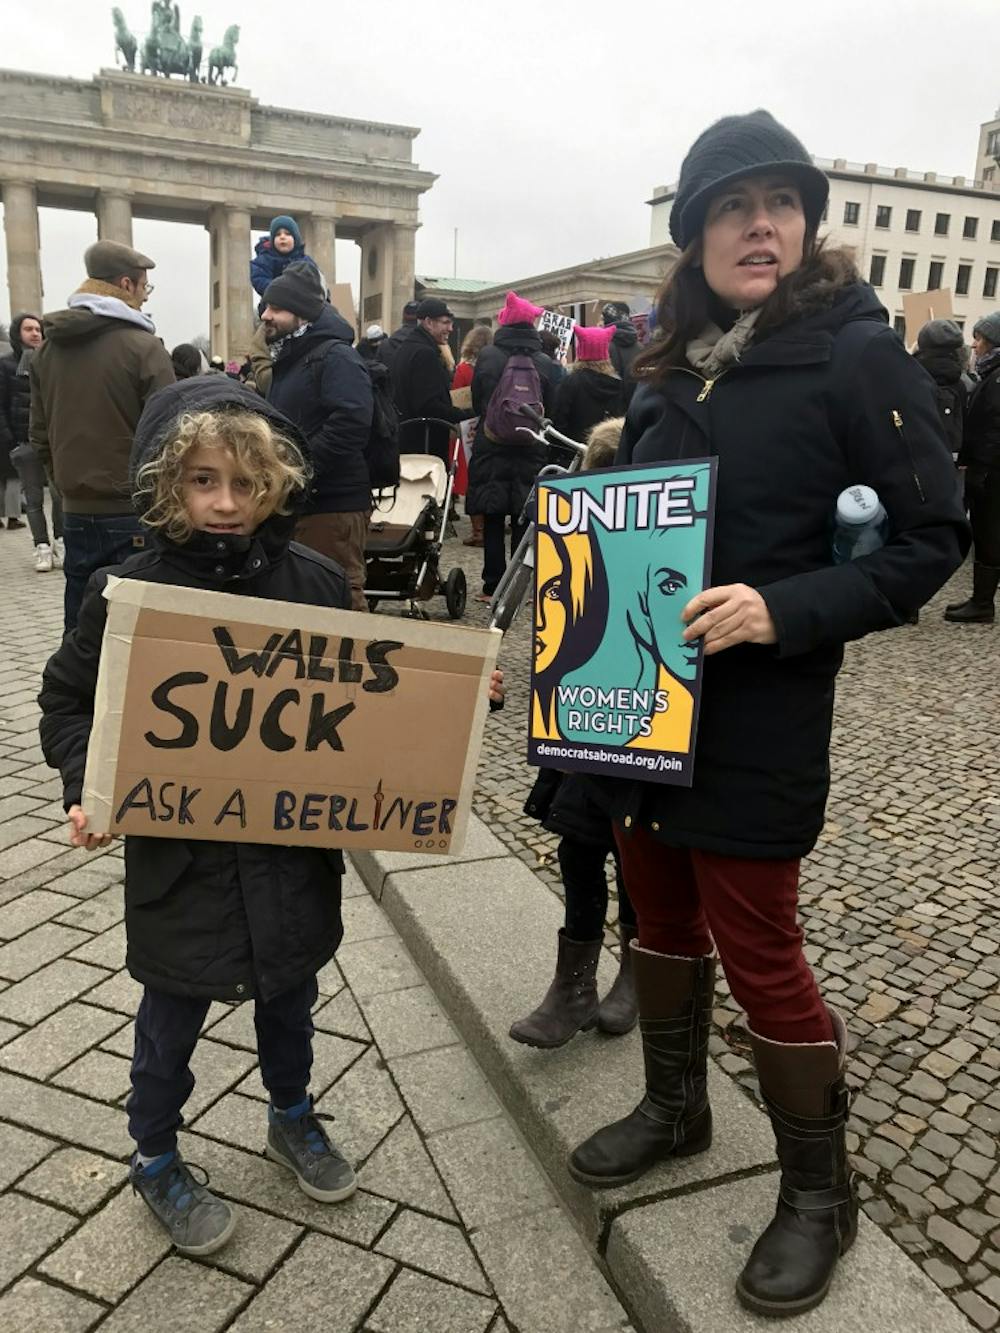 <p>A ten-year-old in front of the Brandenburg Gate holds a protest sign reading "Walls suck / Ask a Berliner" at the Women's March. Berliners view Trump with concern since the United States is important to Germany.</p>